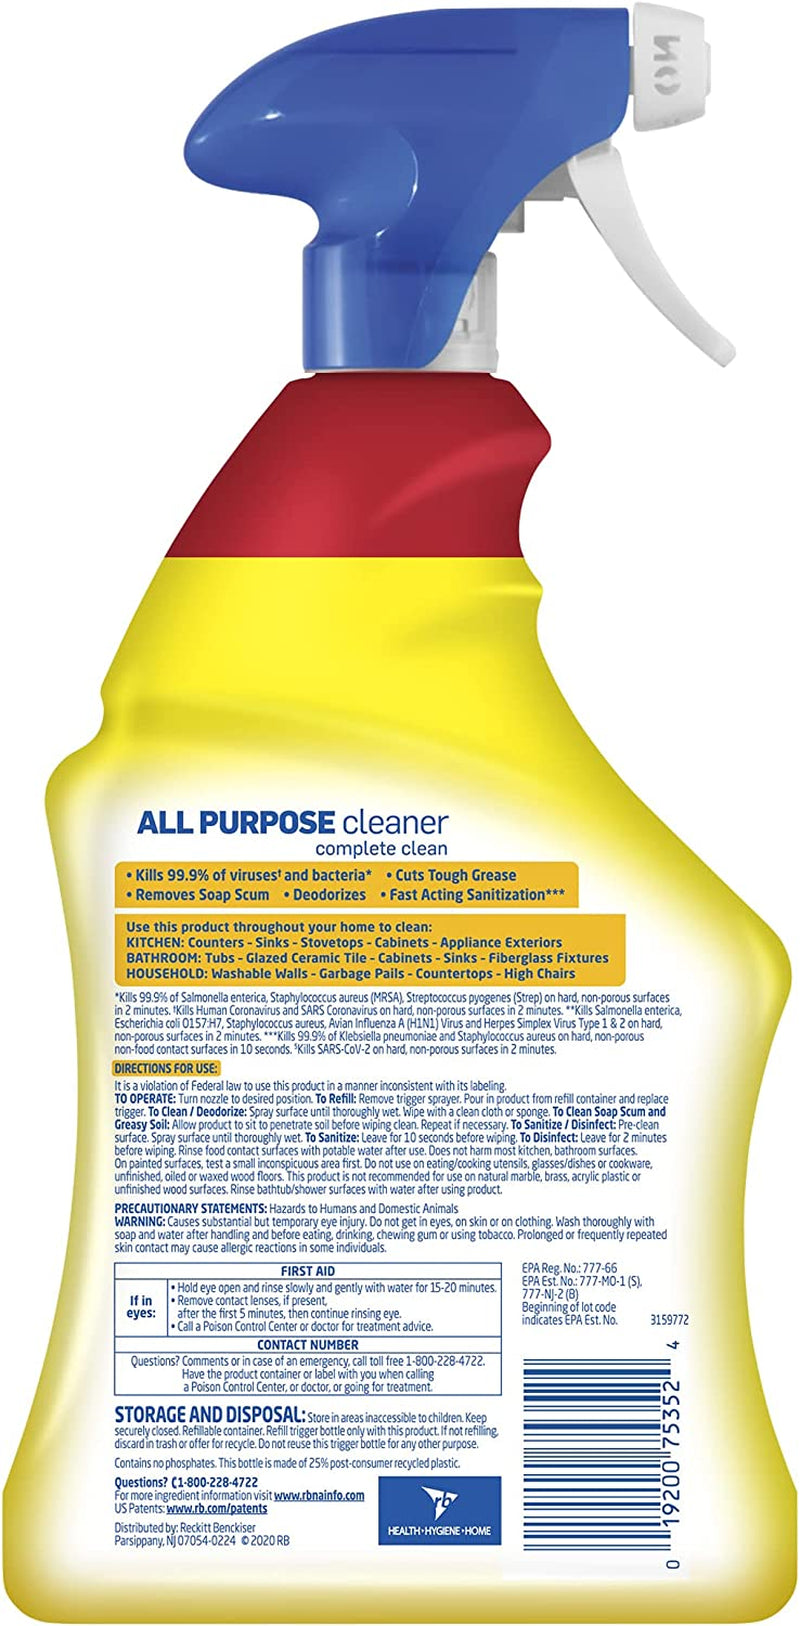 All-Purpose Cleaner, Sanitizing and Disinfecting Spray, to Clean and Deodorize, Lemon Breeze Scent, 32Oz